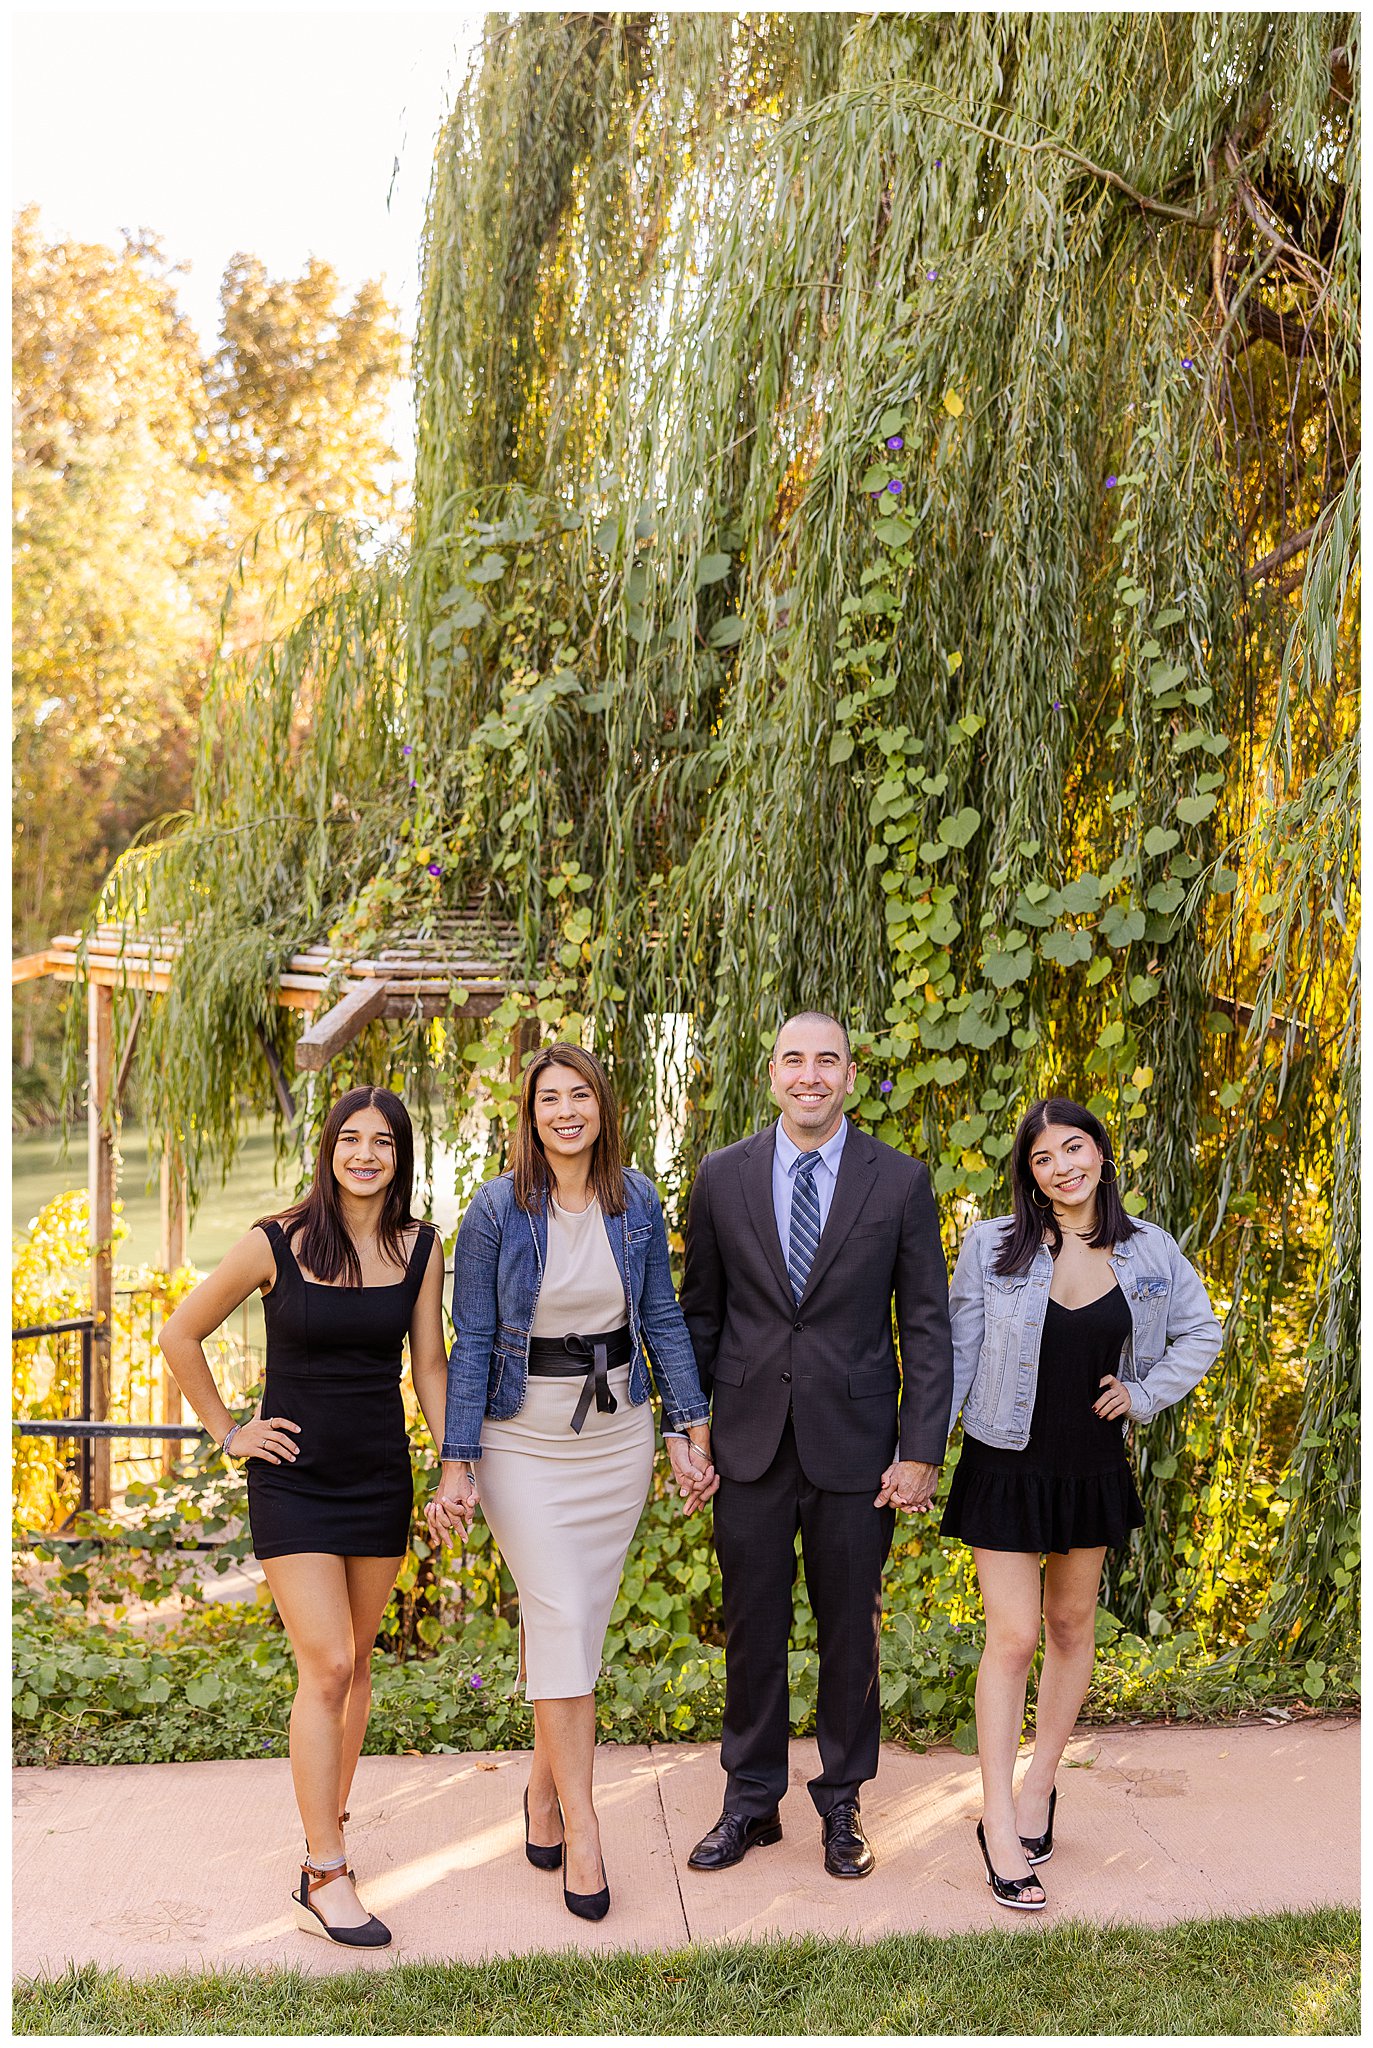 Fall Mini Session at White Ranch Events in Chico CA | Fall Mini Sessions